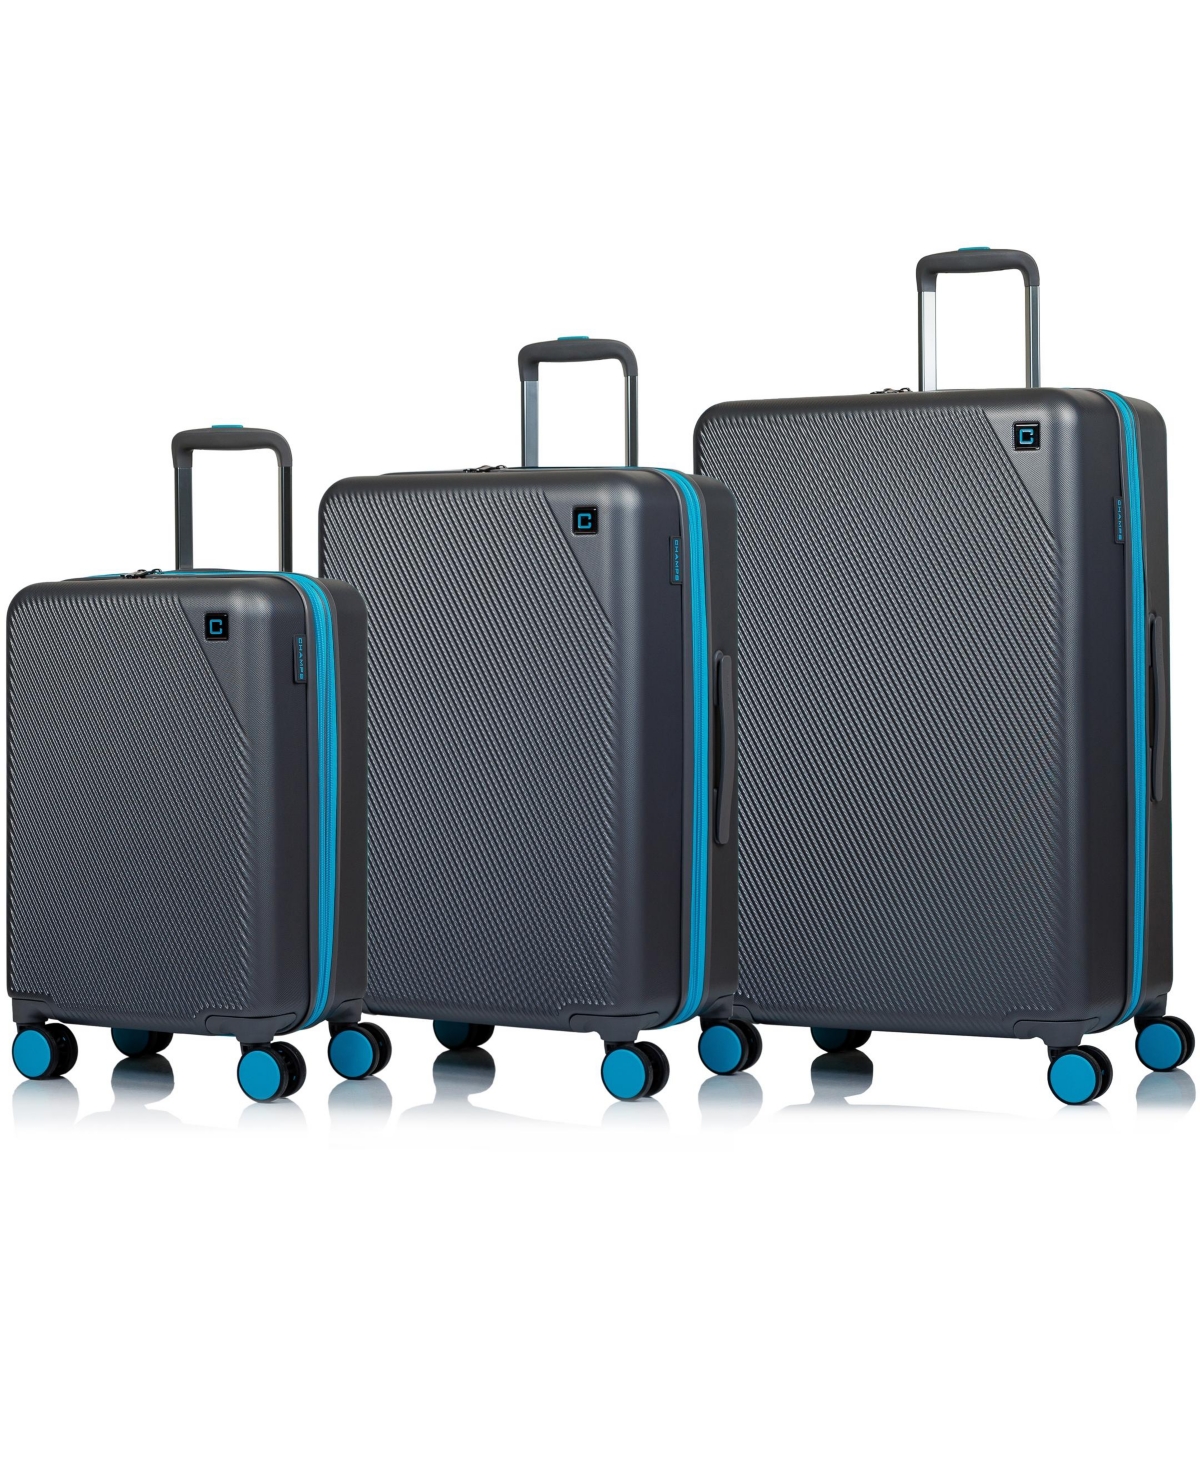 Champs 3-piece Fresh Hardside Luggage Set In Gray